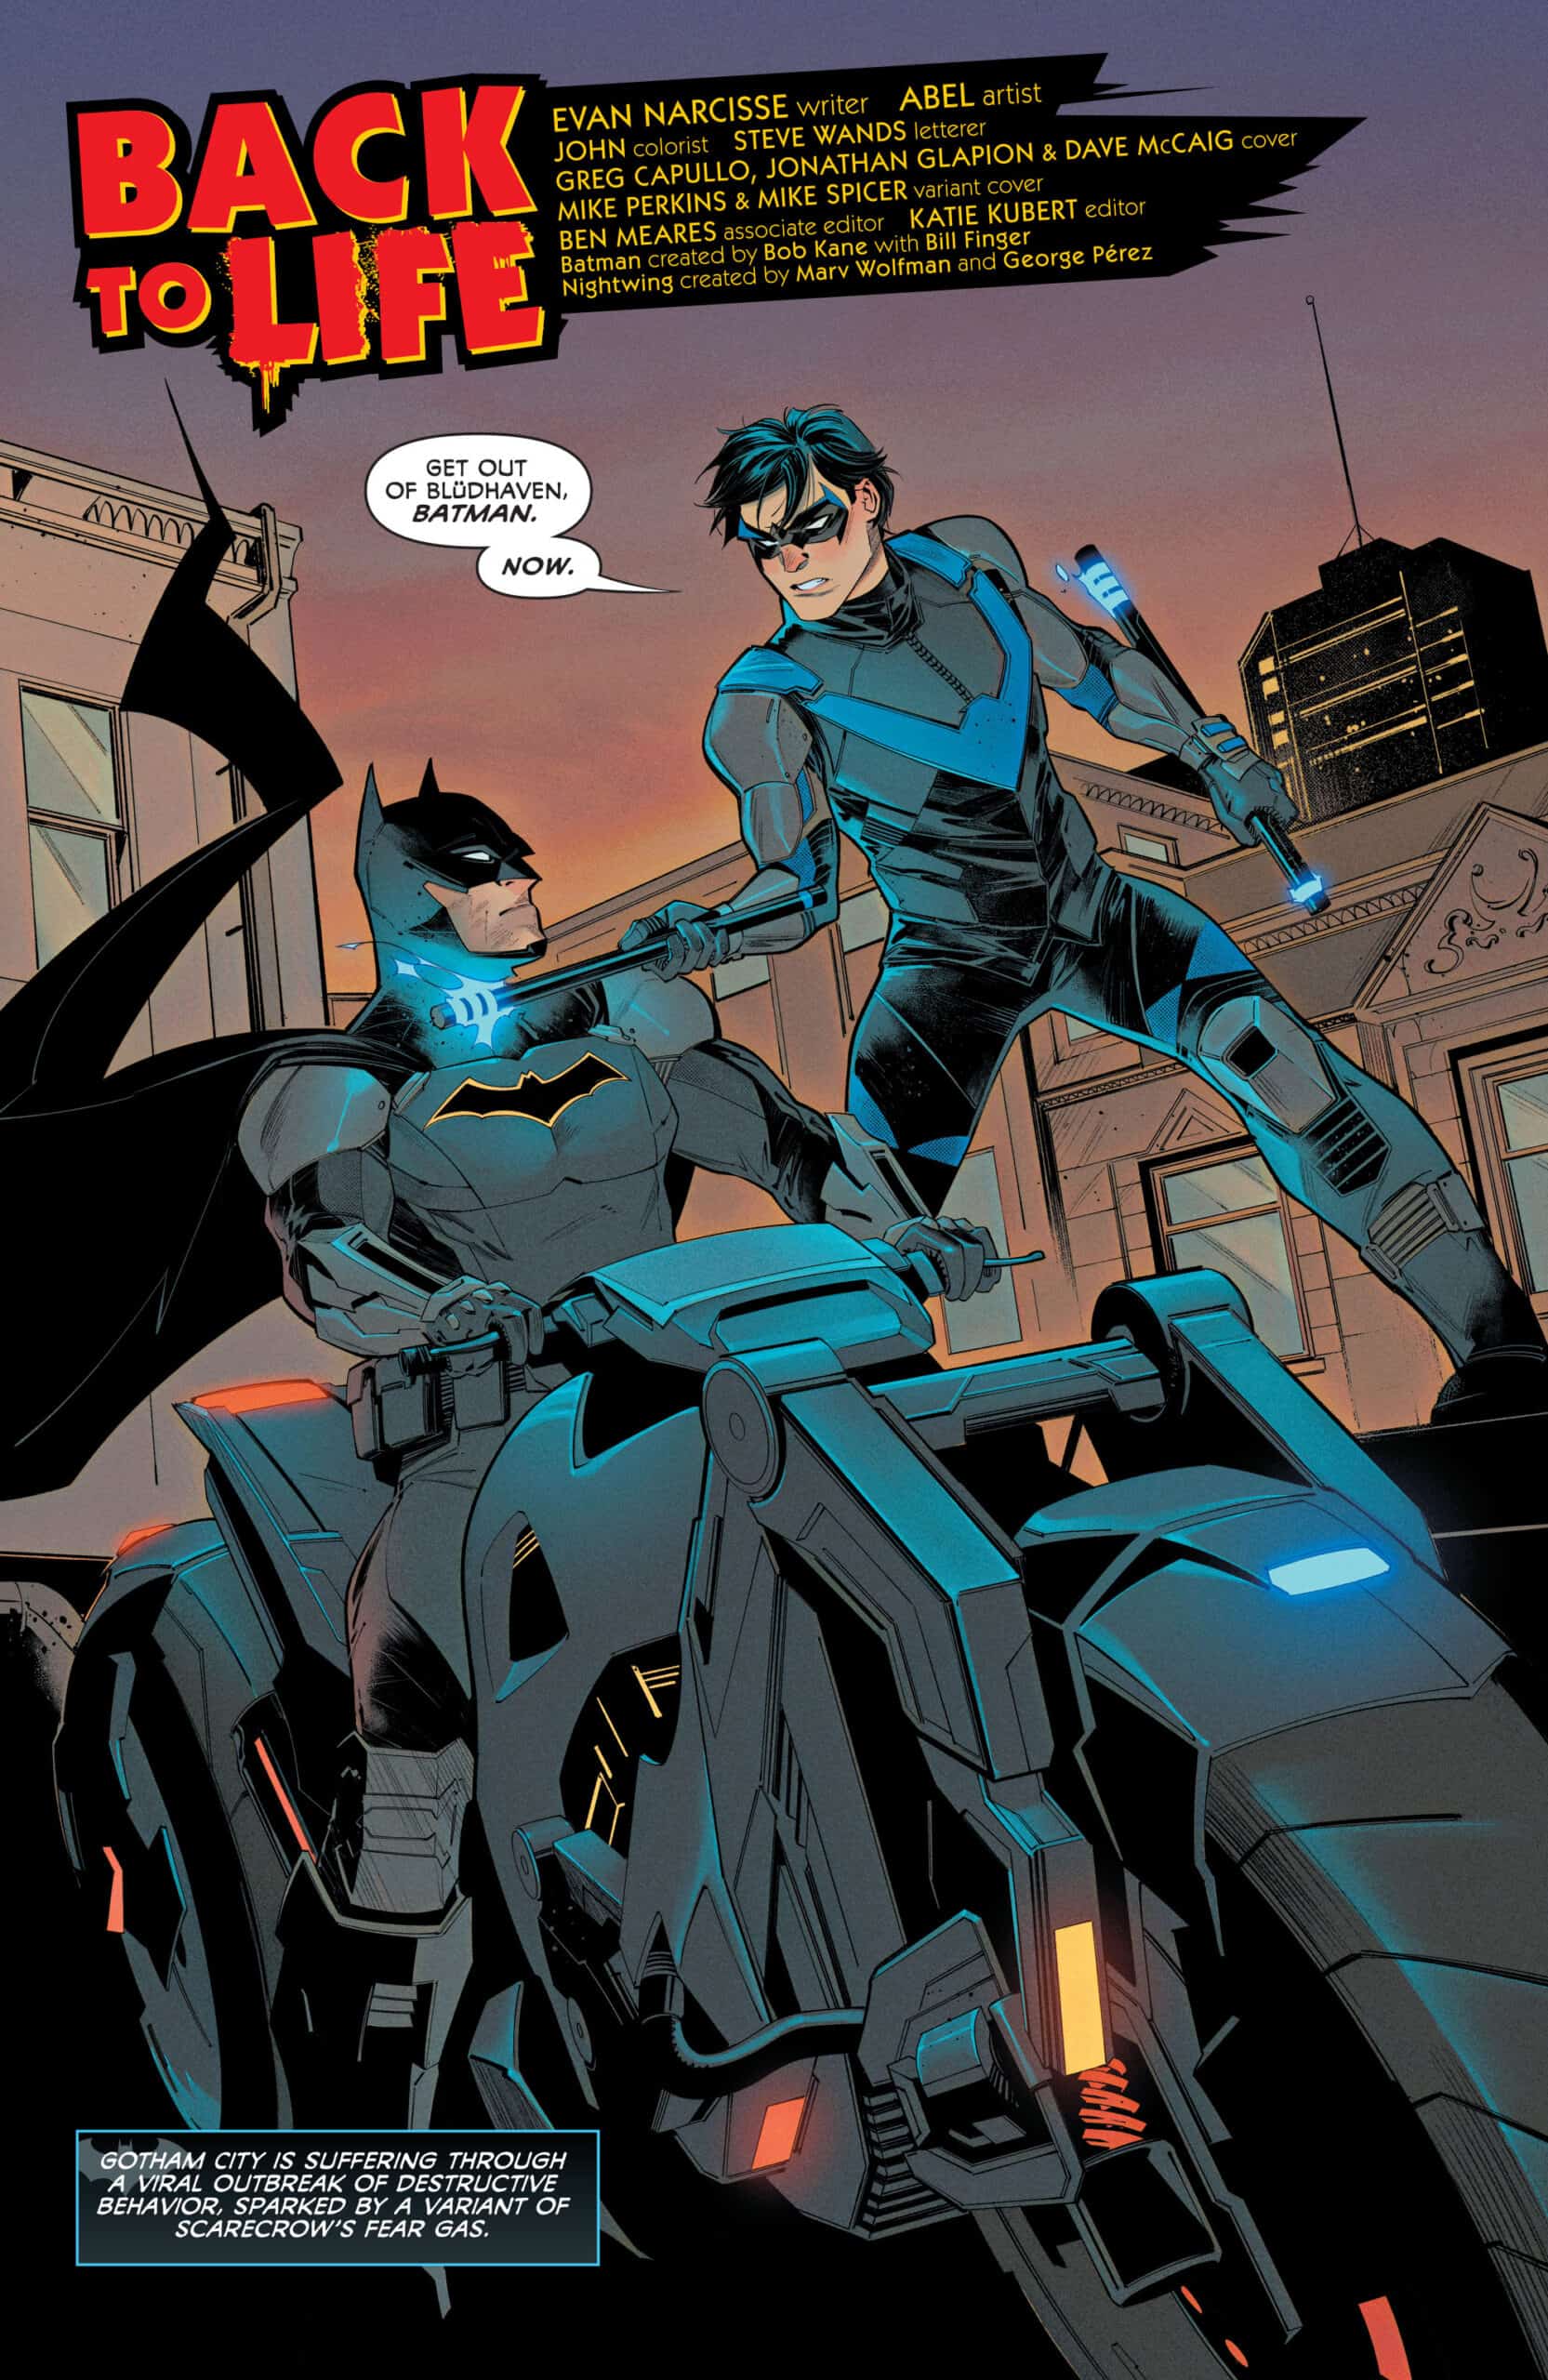 DC's upcoming Gotham Knights game gets a comic book prequel